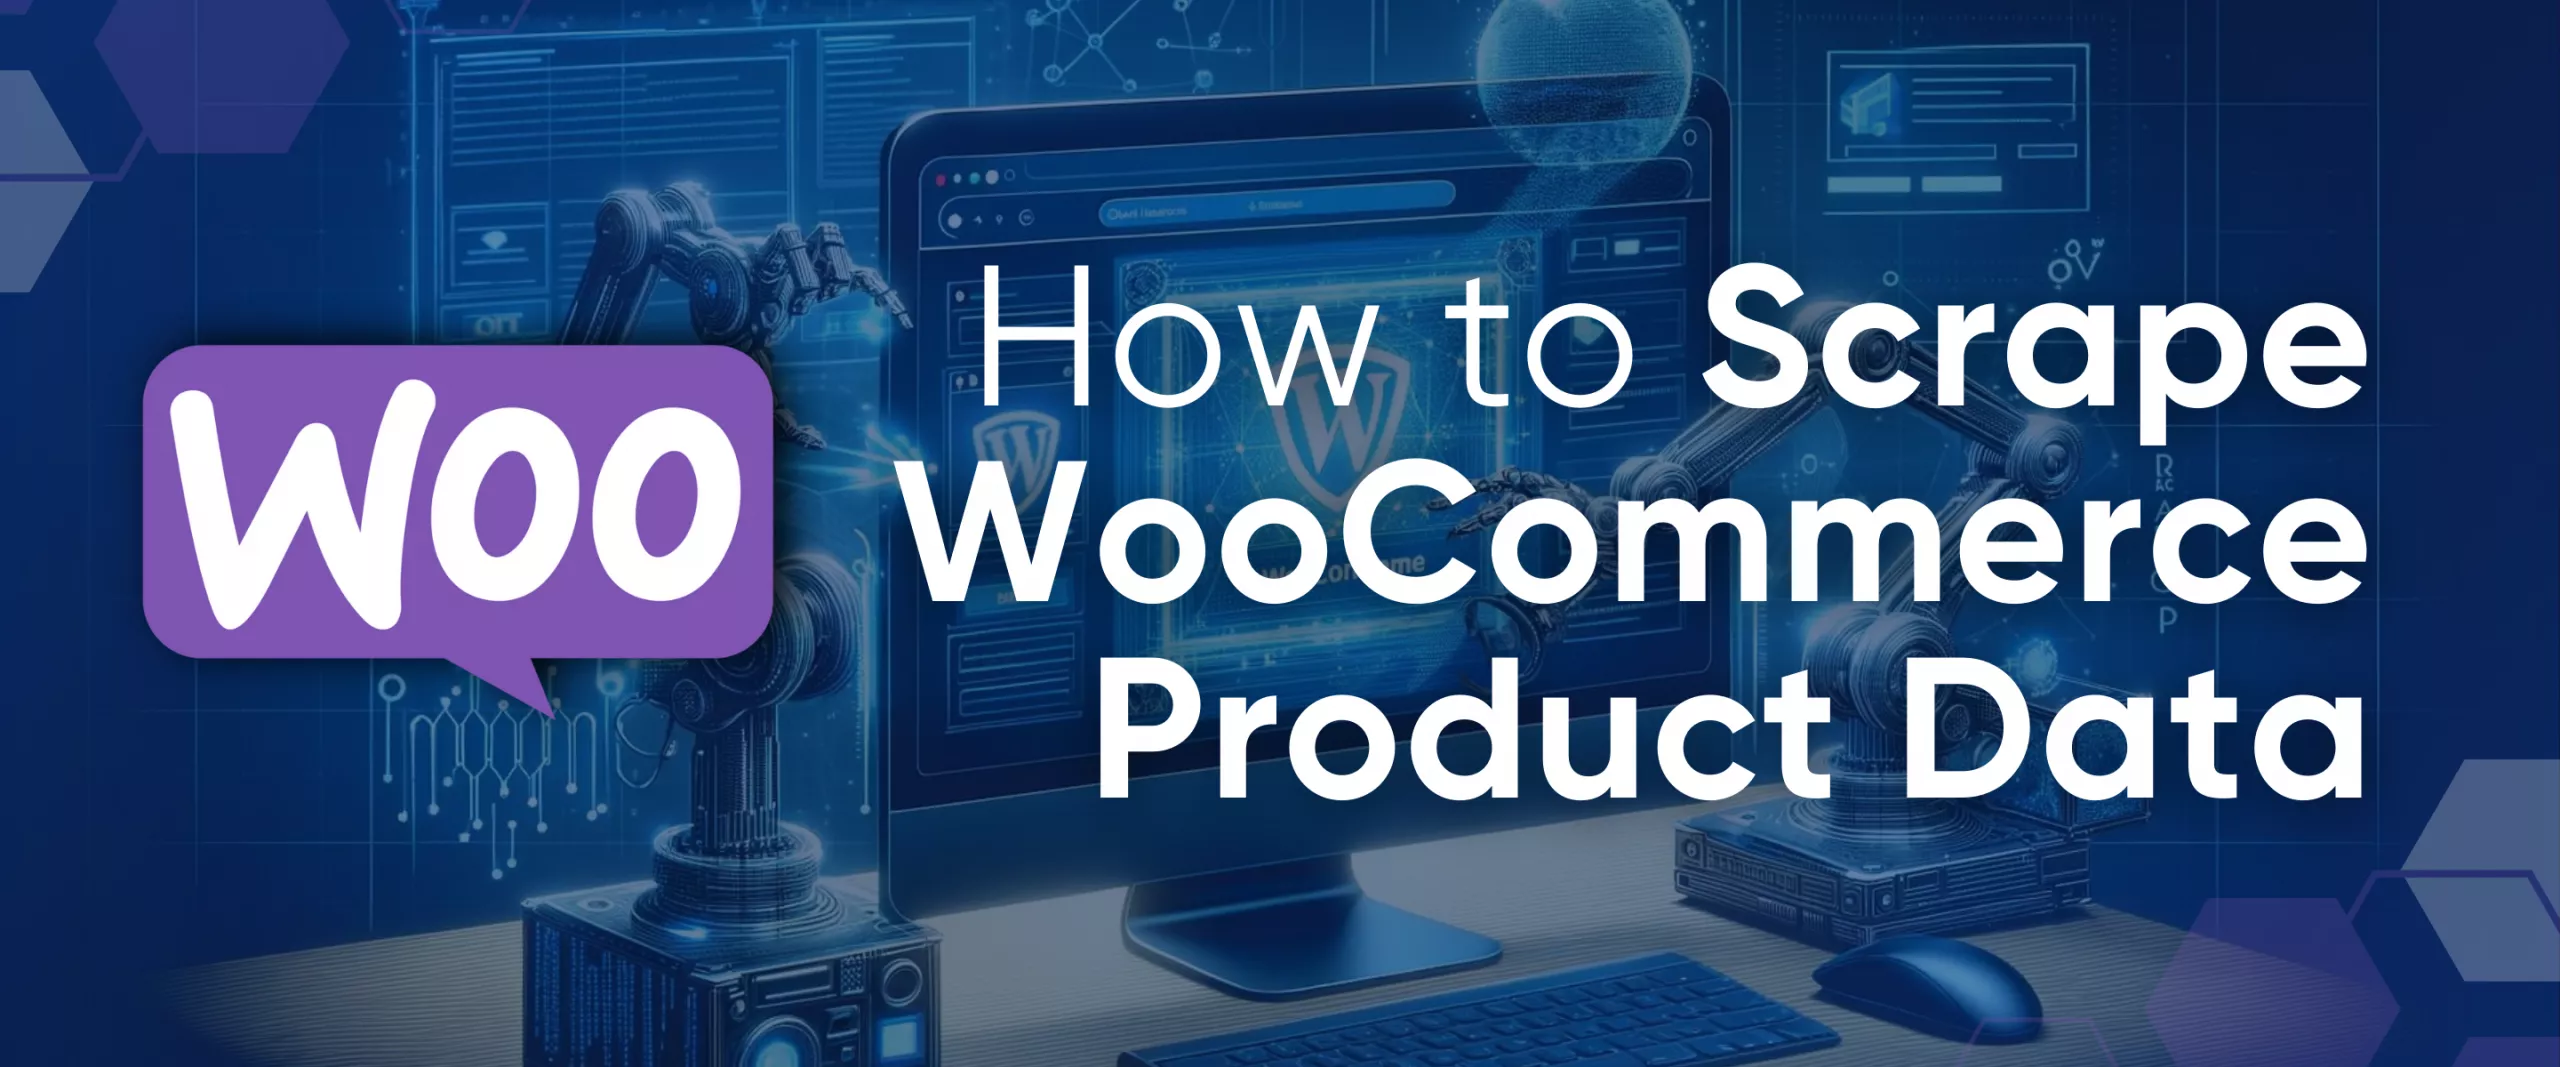 How to Scrape Product Data from WooCommerce Stores